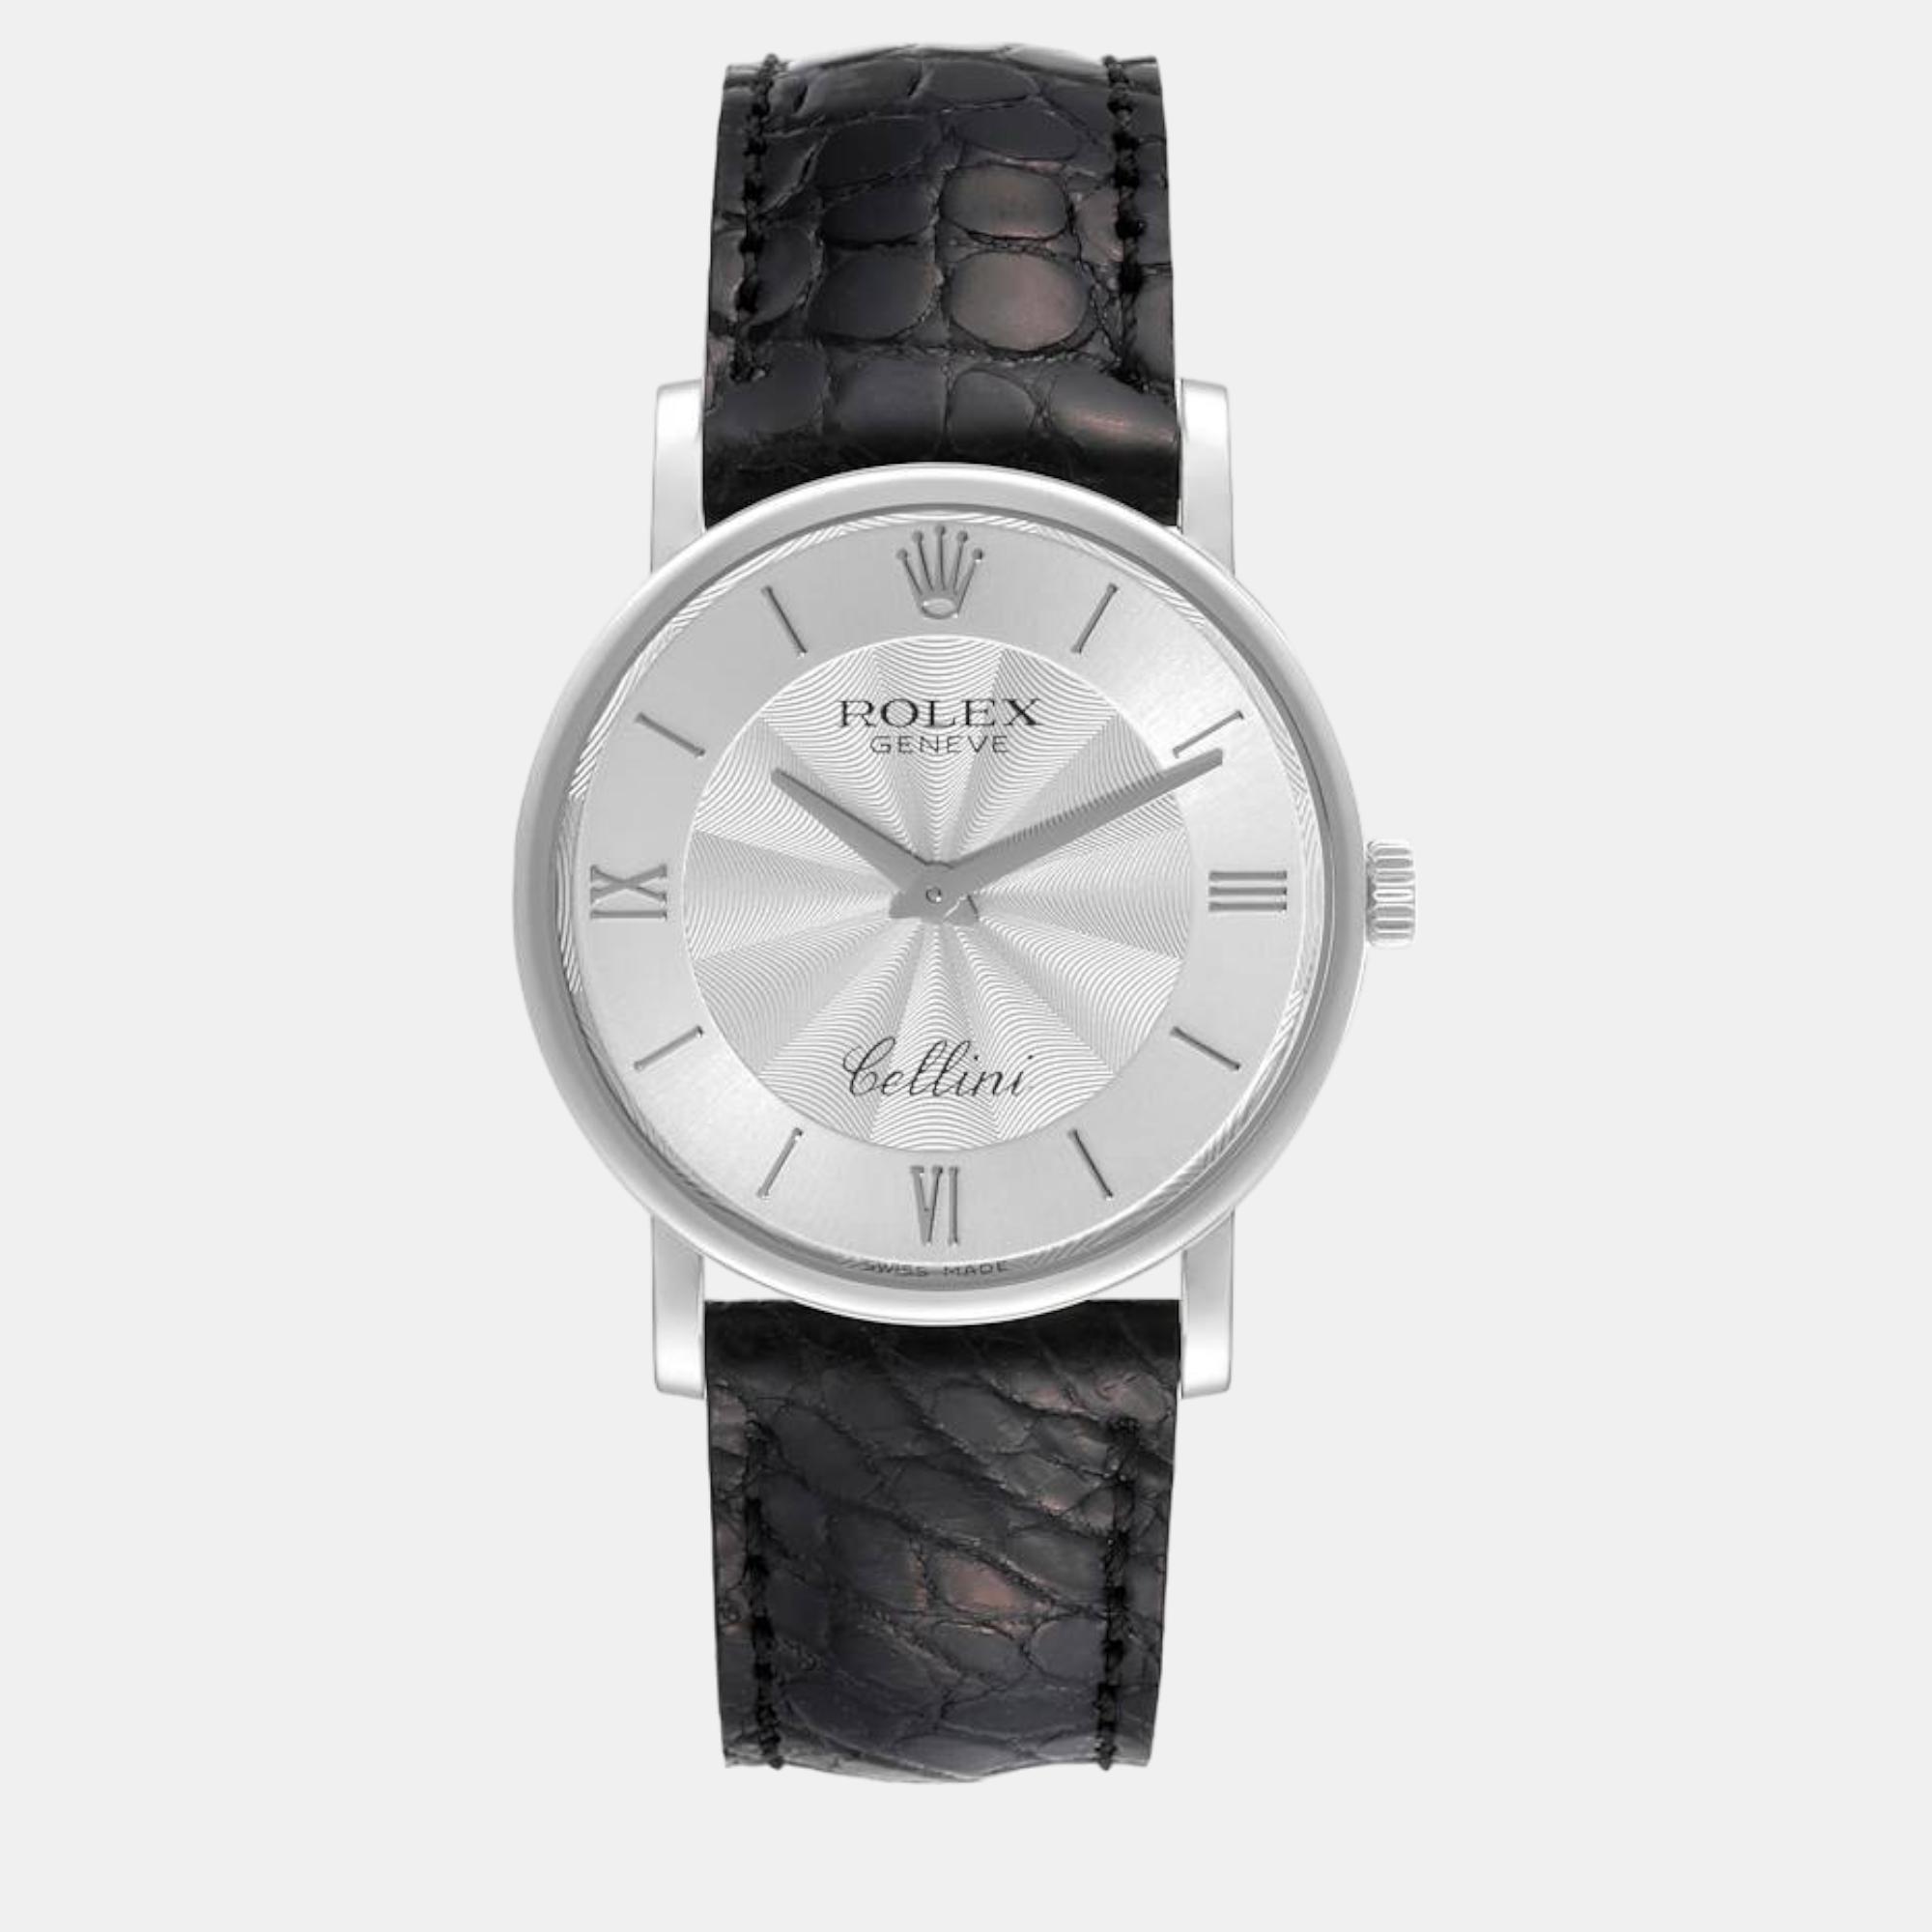 This luxury watch is characterized by skillful craftsmanship and understated charm. Meticulously constructed to tell time in an elegant way it comes in a sturdy case and flaunts a seamless blend of innovative design and flawless style.